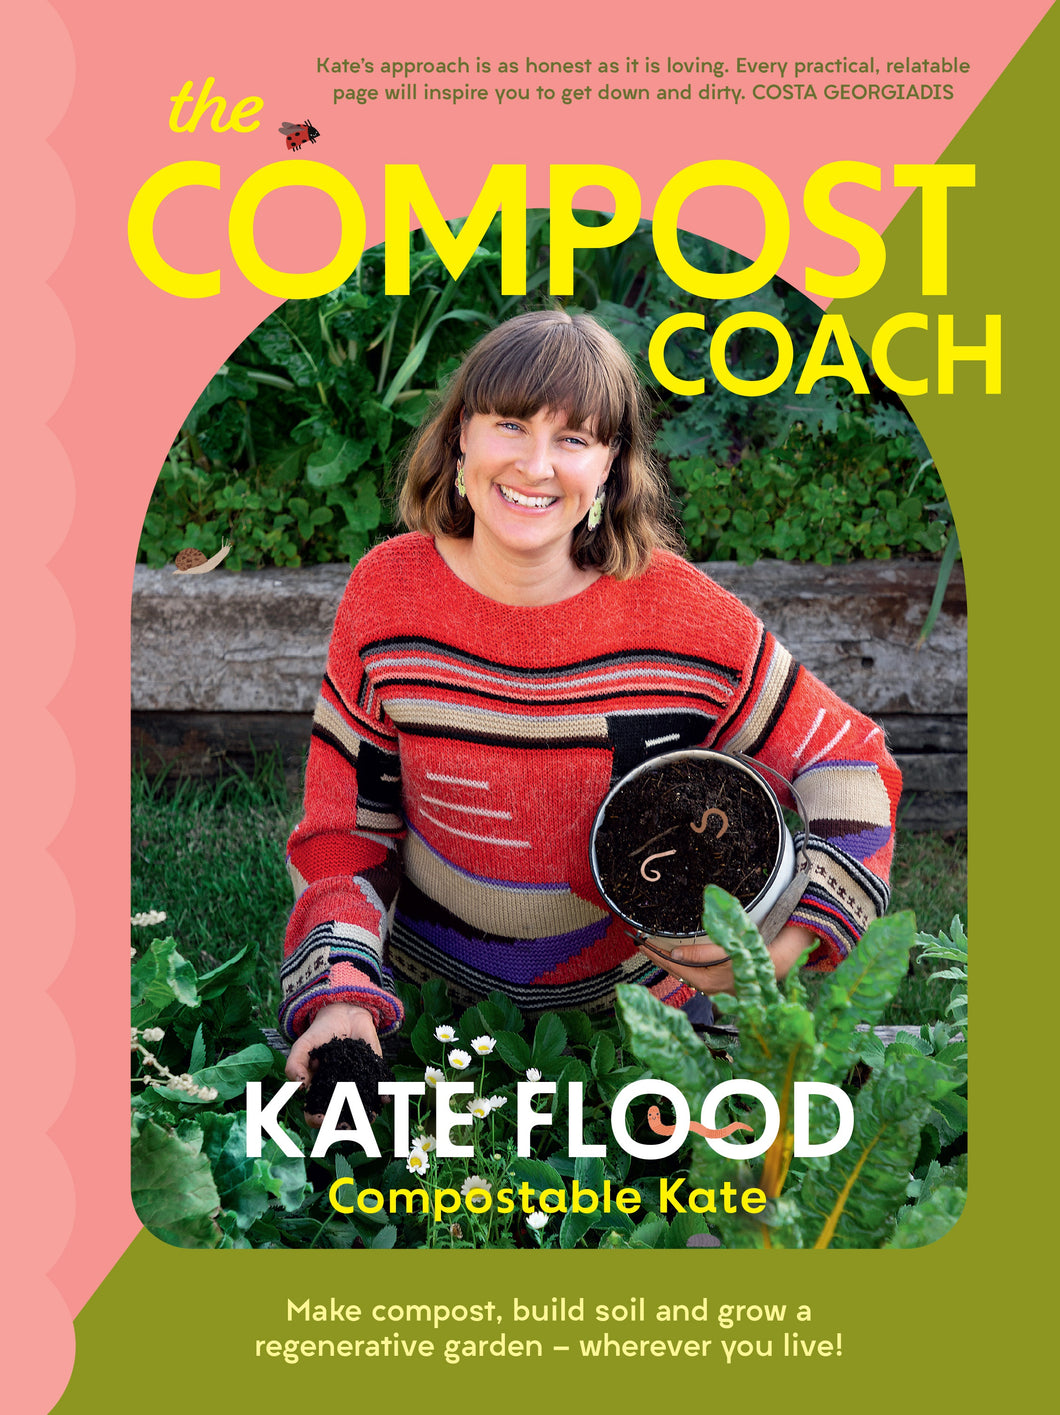 Compost Coach by Kate Flood